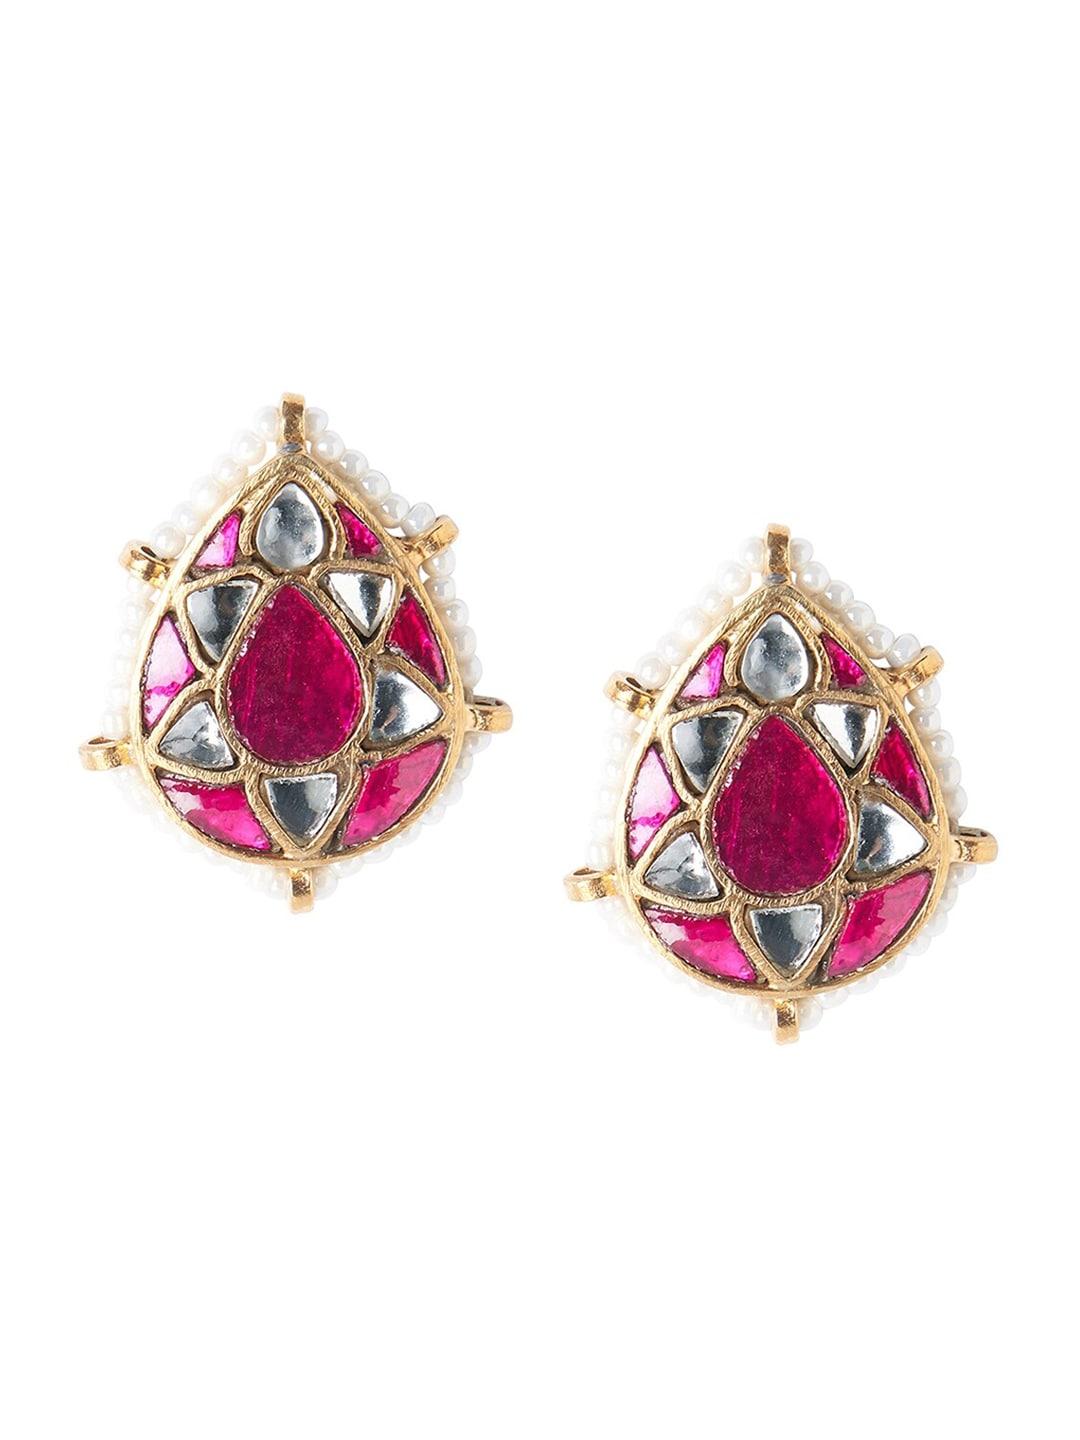 ahilya 92.5 sterling silver gold-plated contemporary studs earrings